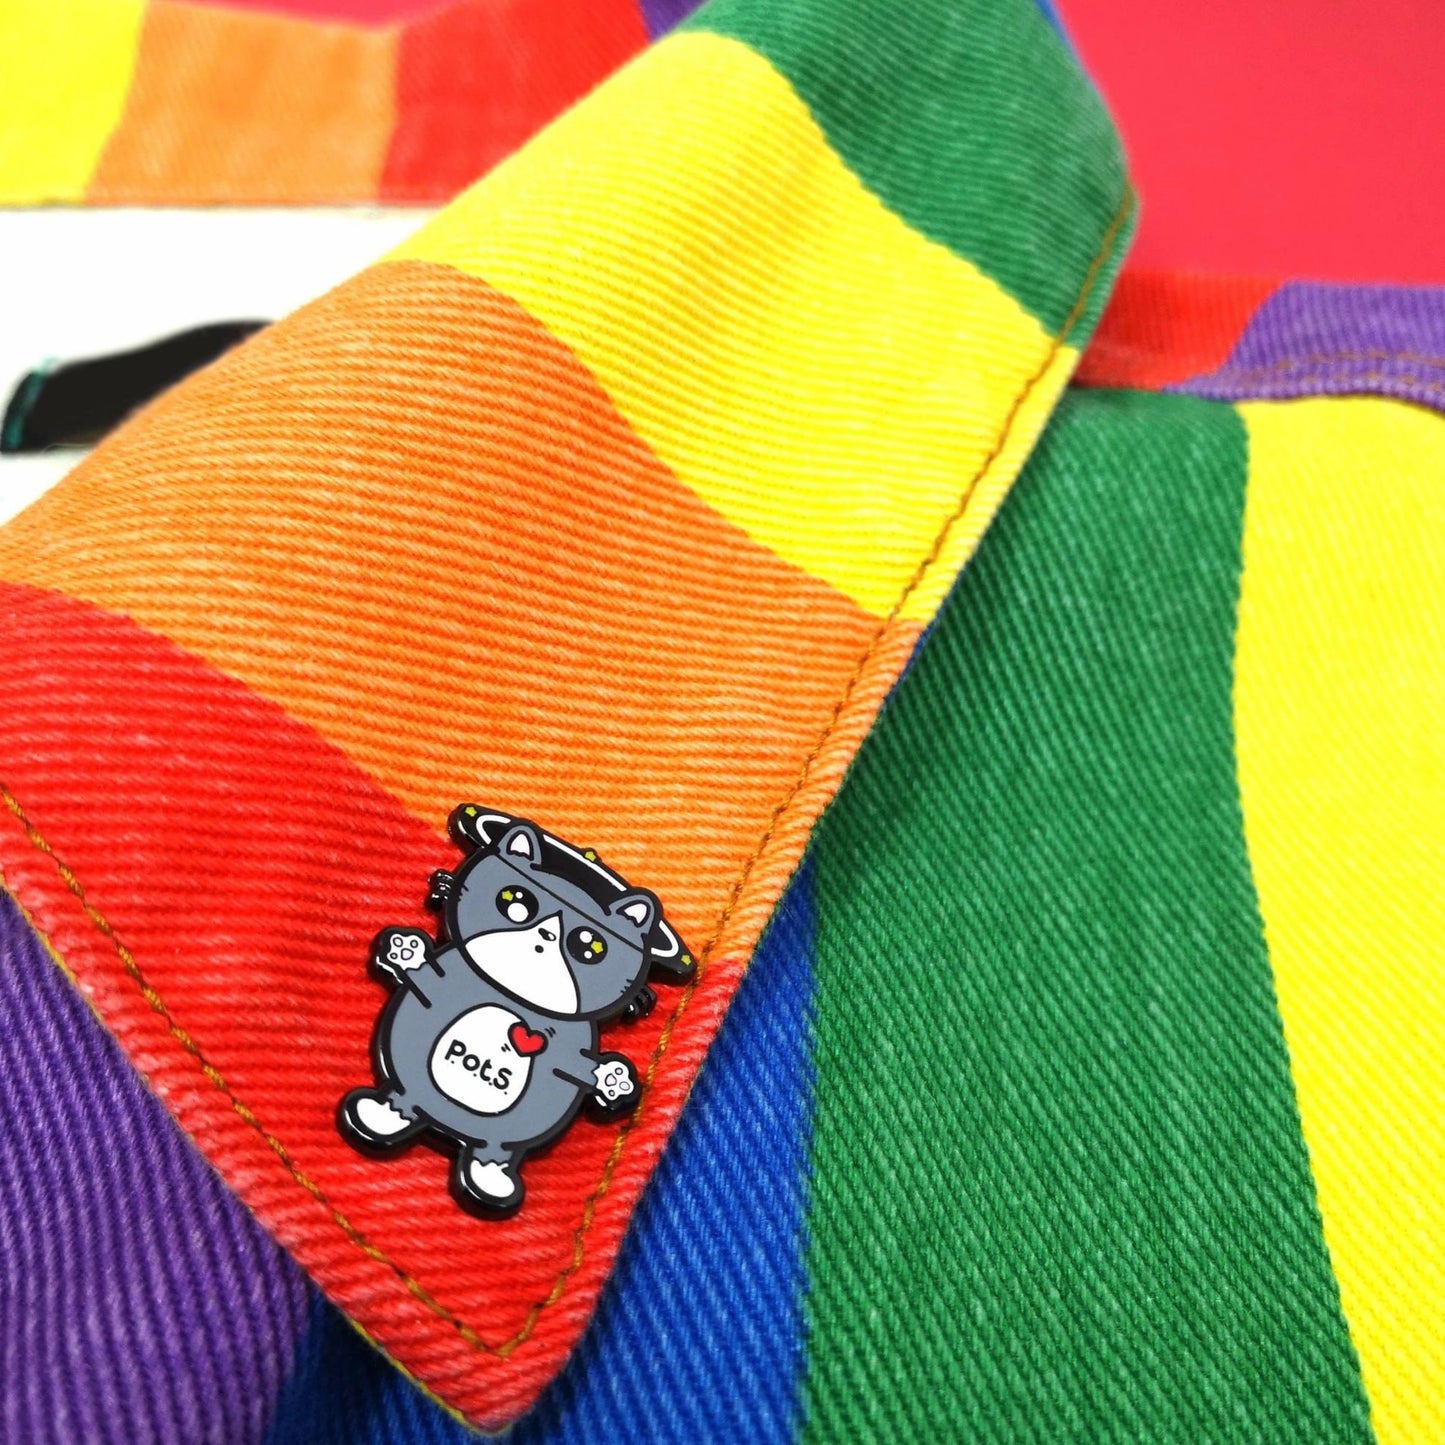 An enamel pin of a cat illustration with spinning dizzy stars around its head with its paws outstretched and postural tachycatdid syndrome (pots) written on its belly it is on a rainbow denim jacket collar. Postural tachycardia syndrome (PoTS) is when your heart rate increases very quickly after getting up from sitting or lying down.